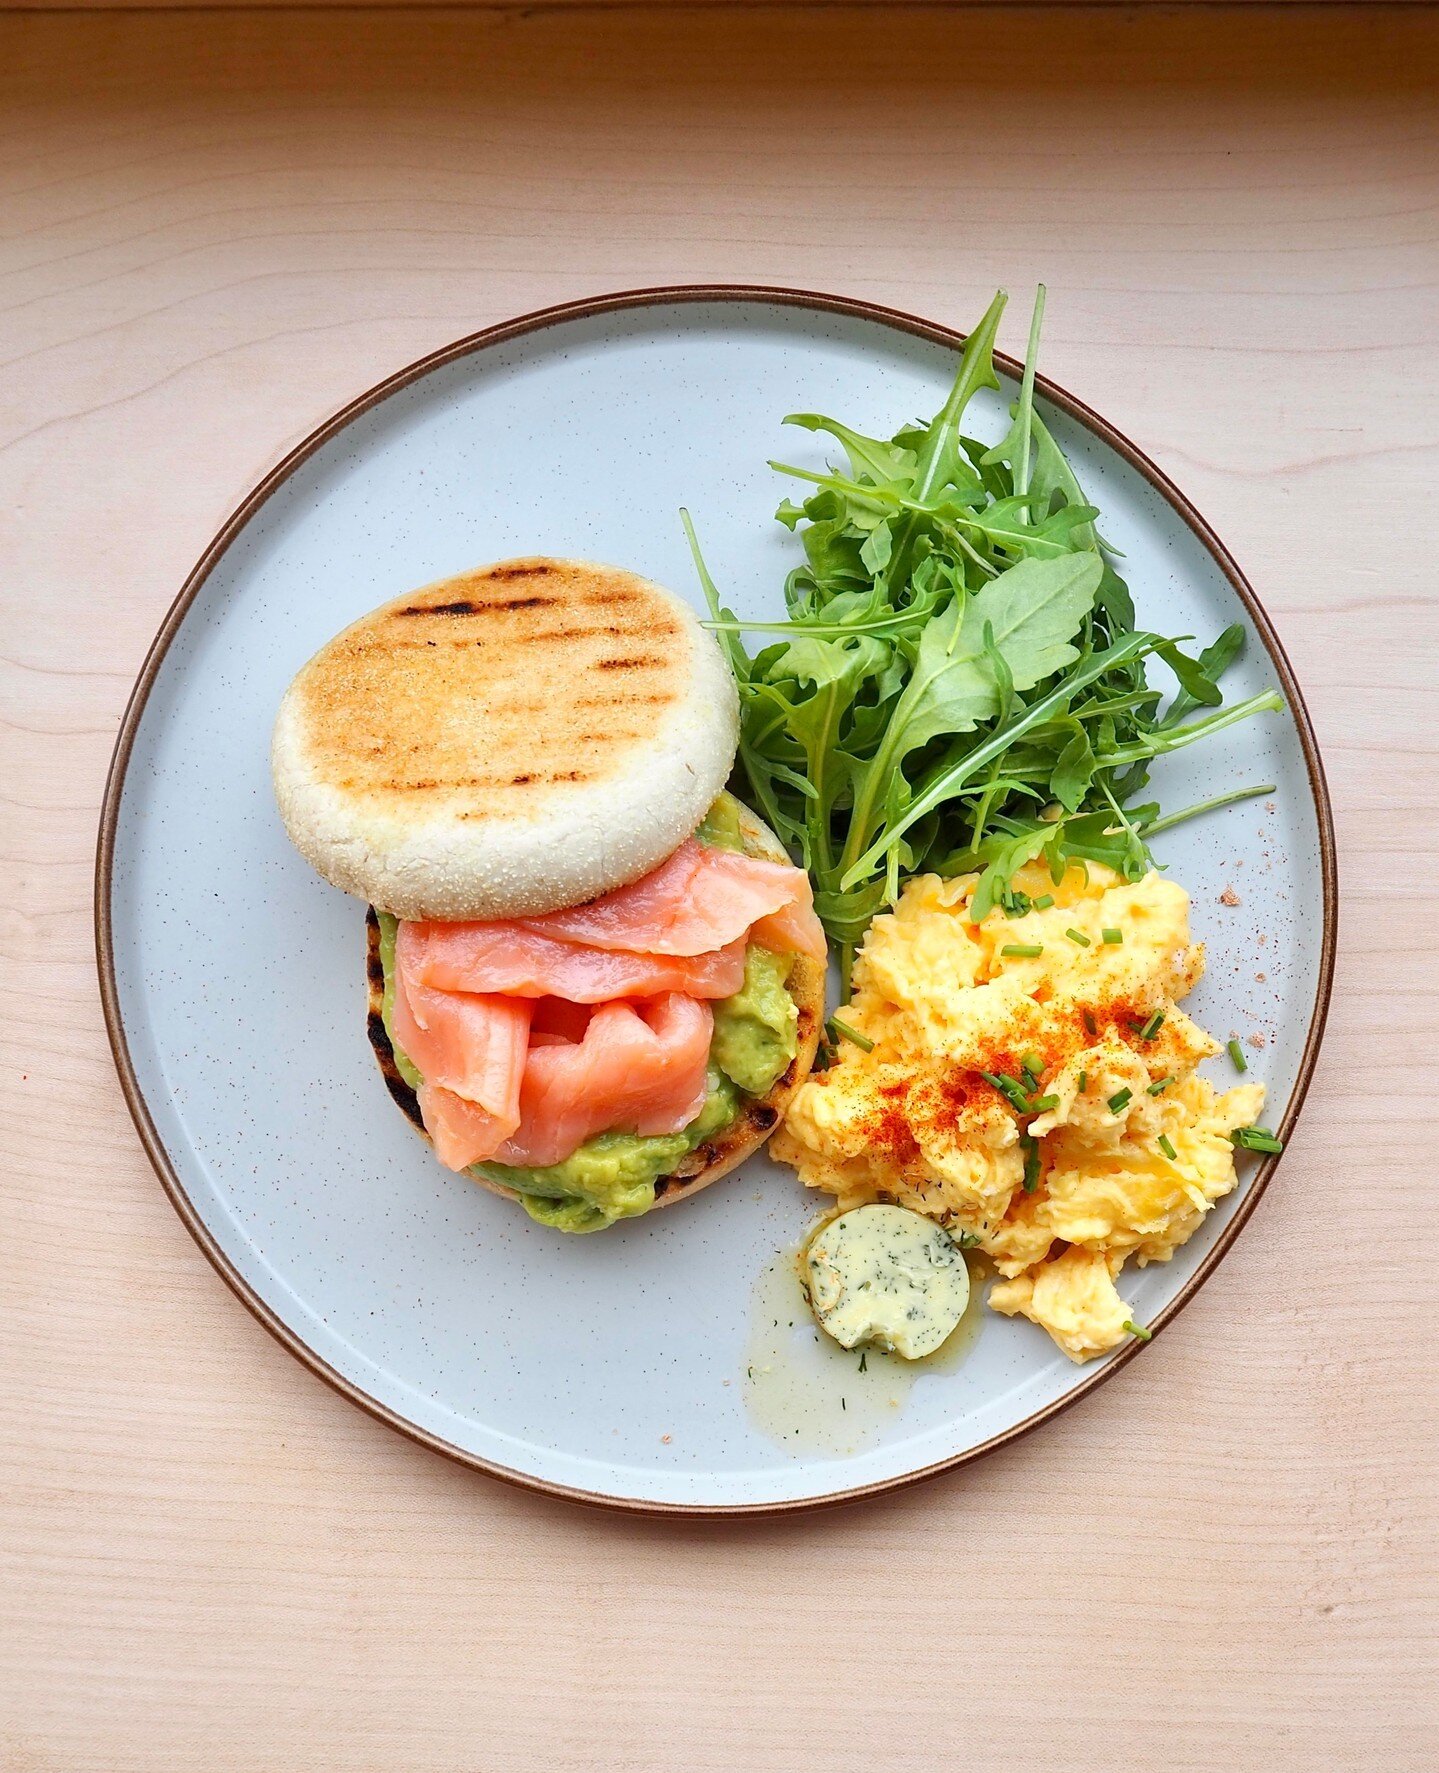 Eat. Sleep. Muffin. Repeat. 🍽

Introducing our Smoked salmon muffin with guacamole, scrambled egg, dill butter and rocket. 

#dough #doughhereford #smokedsalmon #muffin #scrambledegg #foodpic #instafood